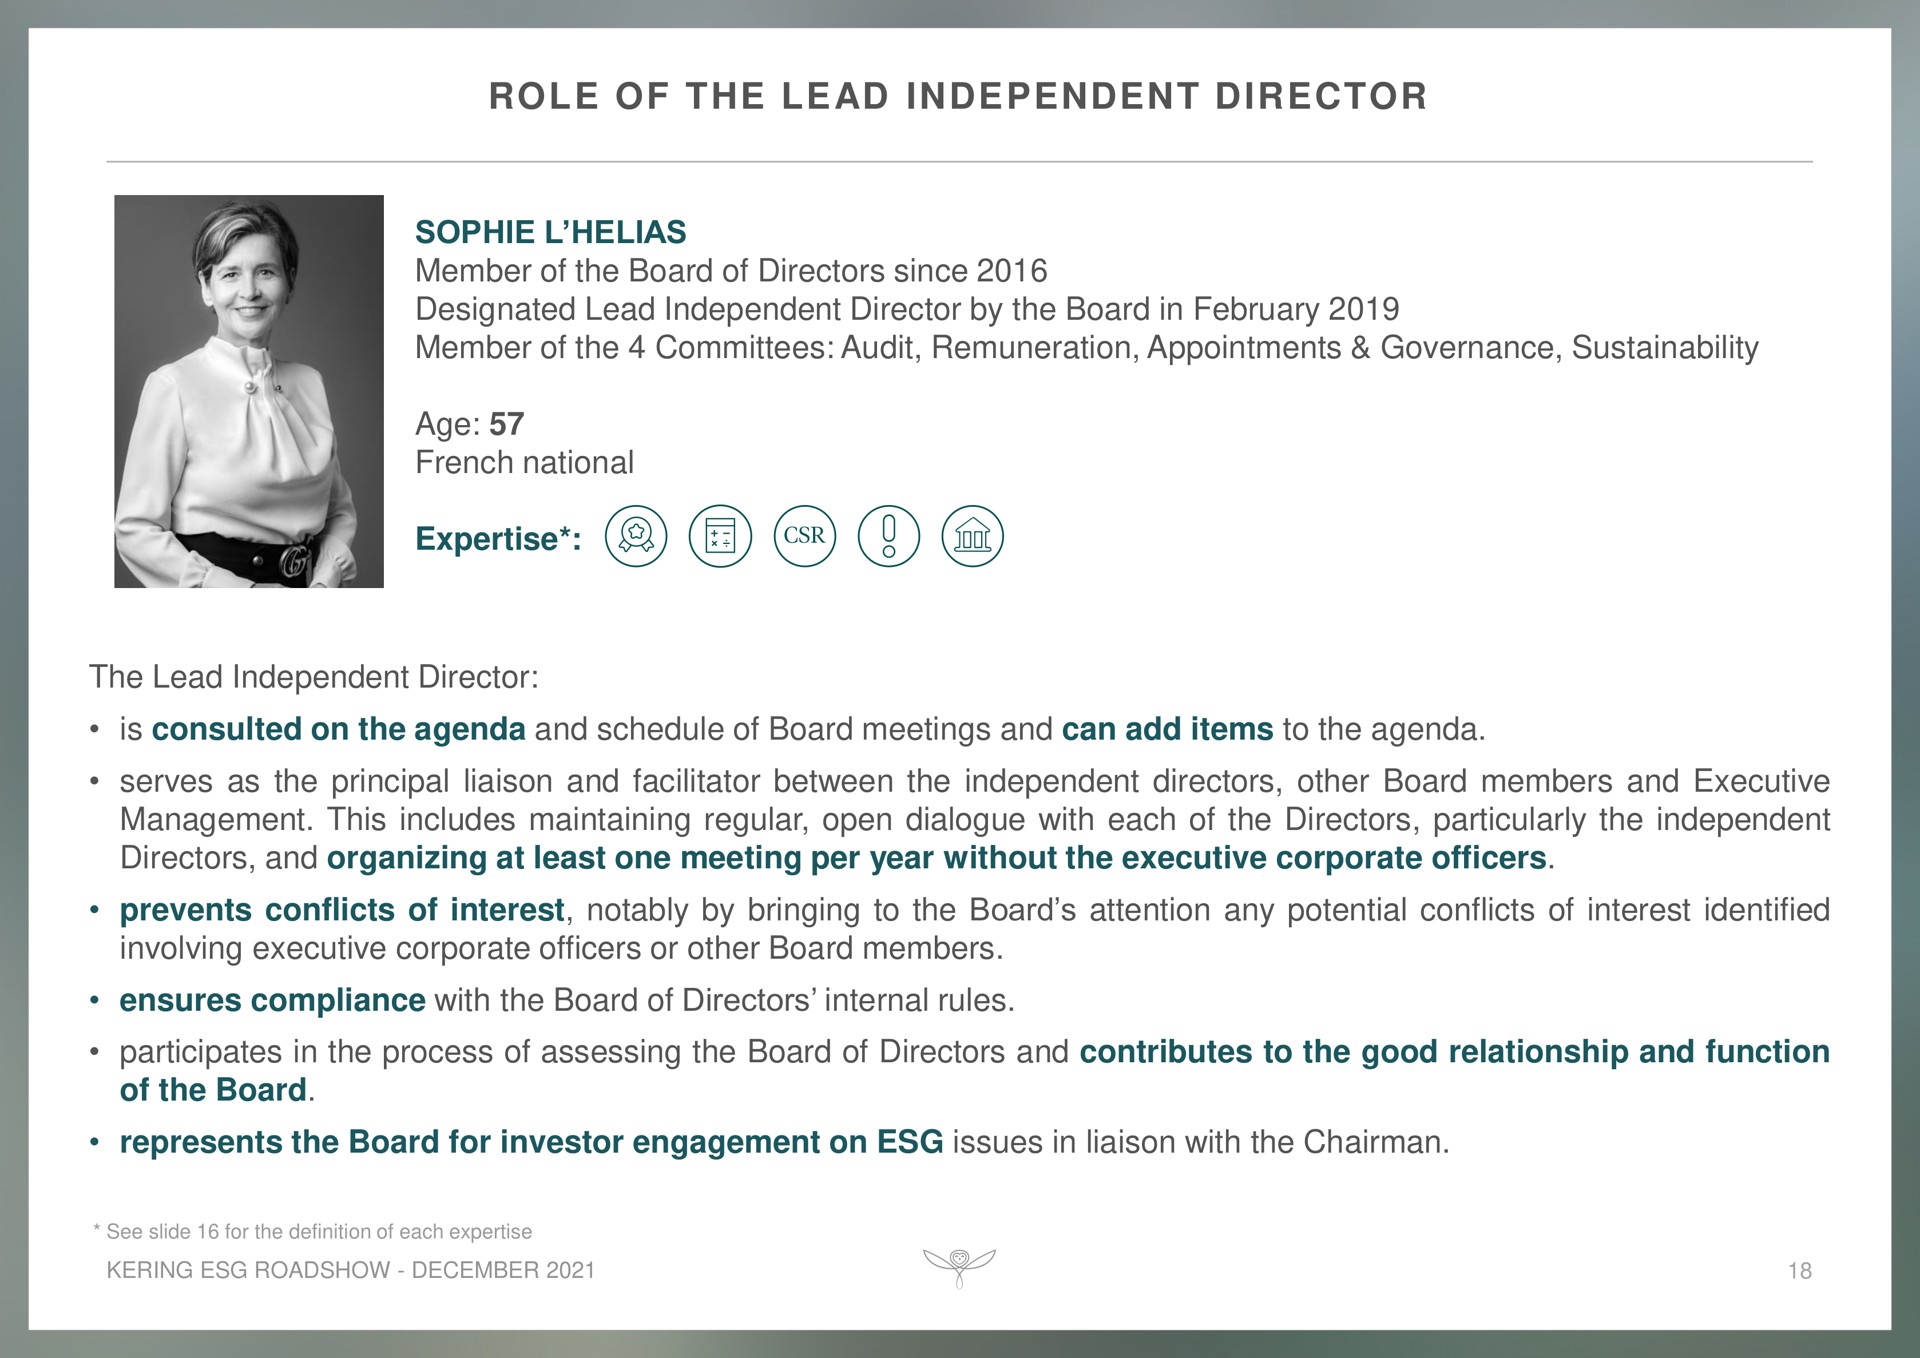 role of the lead independent director | Kering